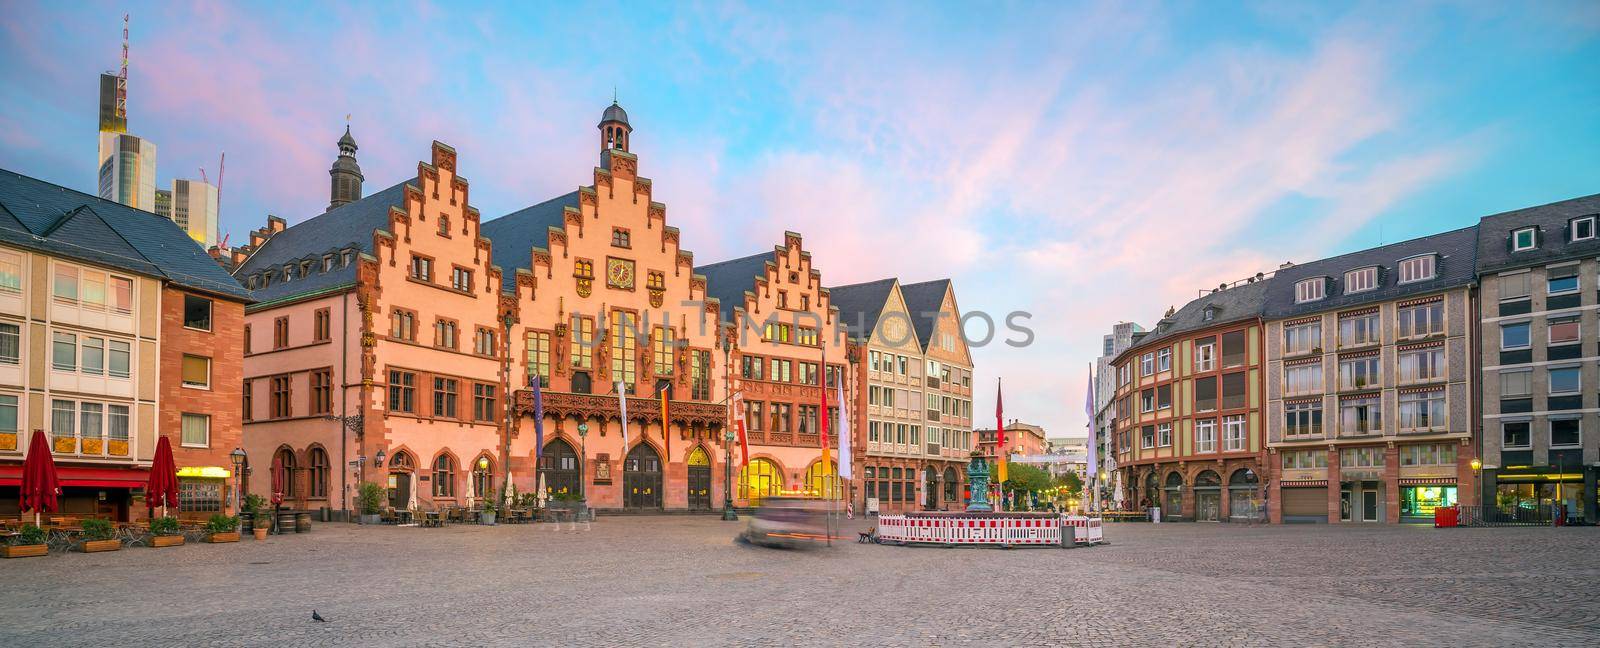 Old town square romerberg in downtown Frankfurt, Germany by f11photo